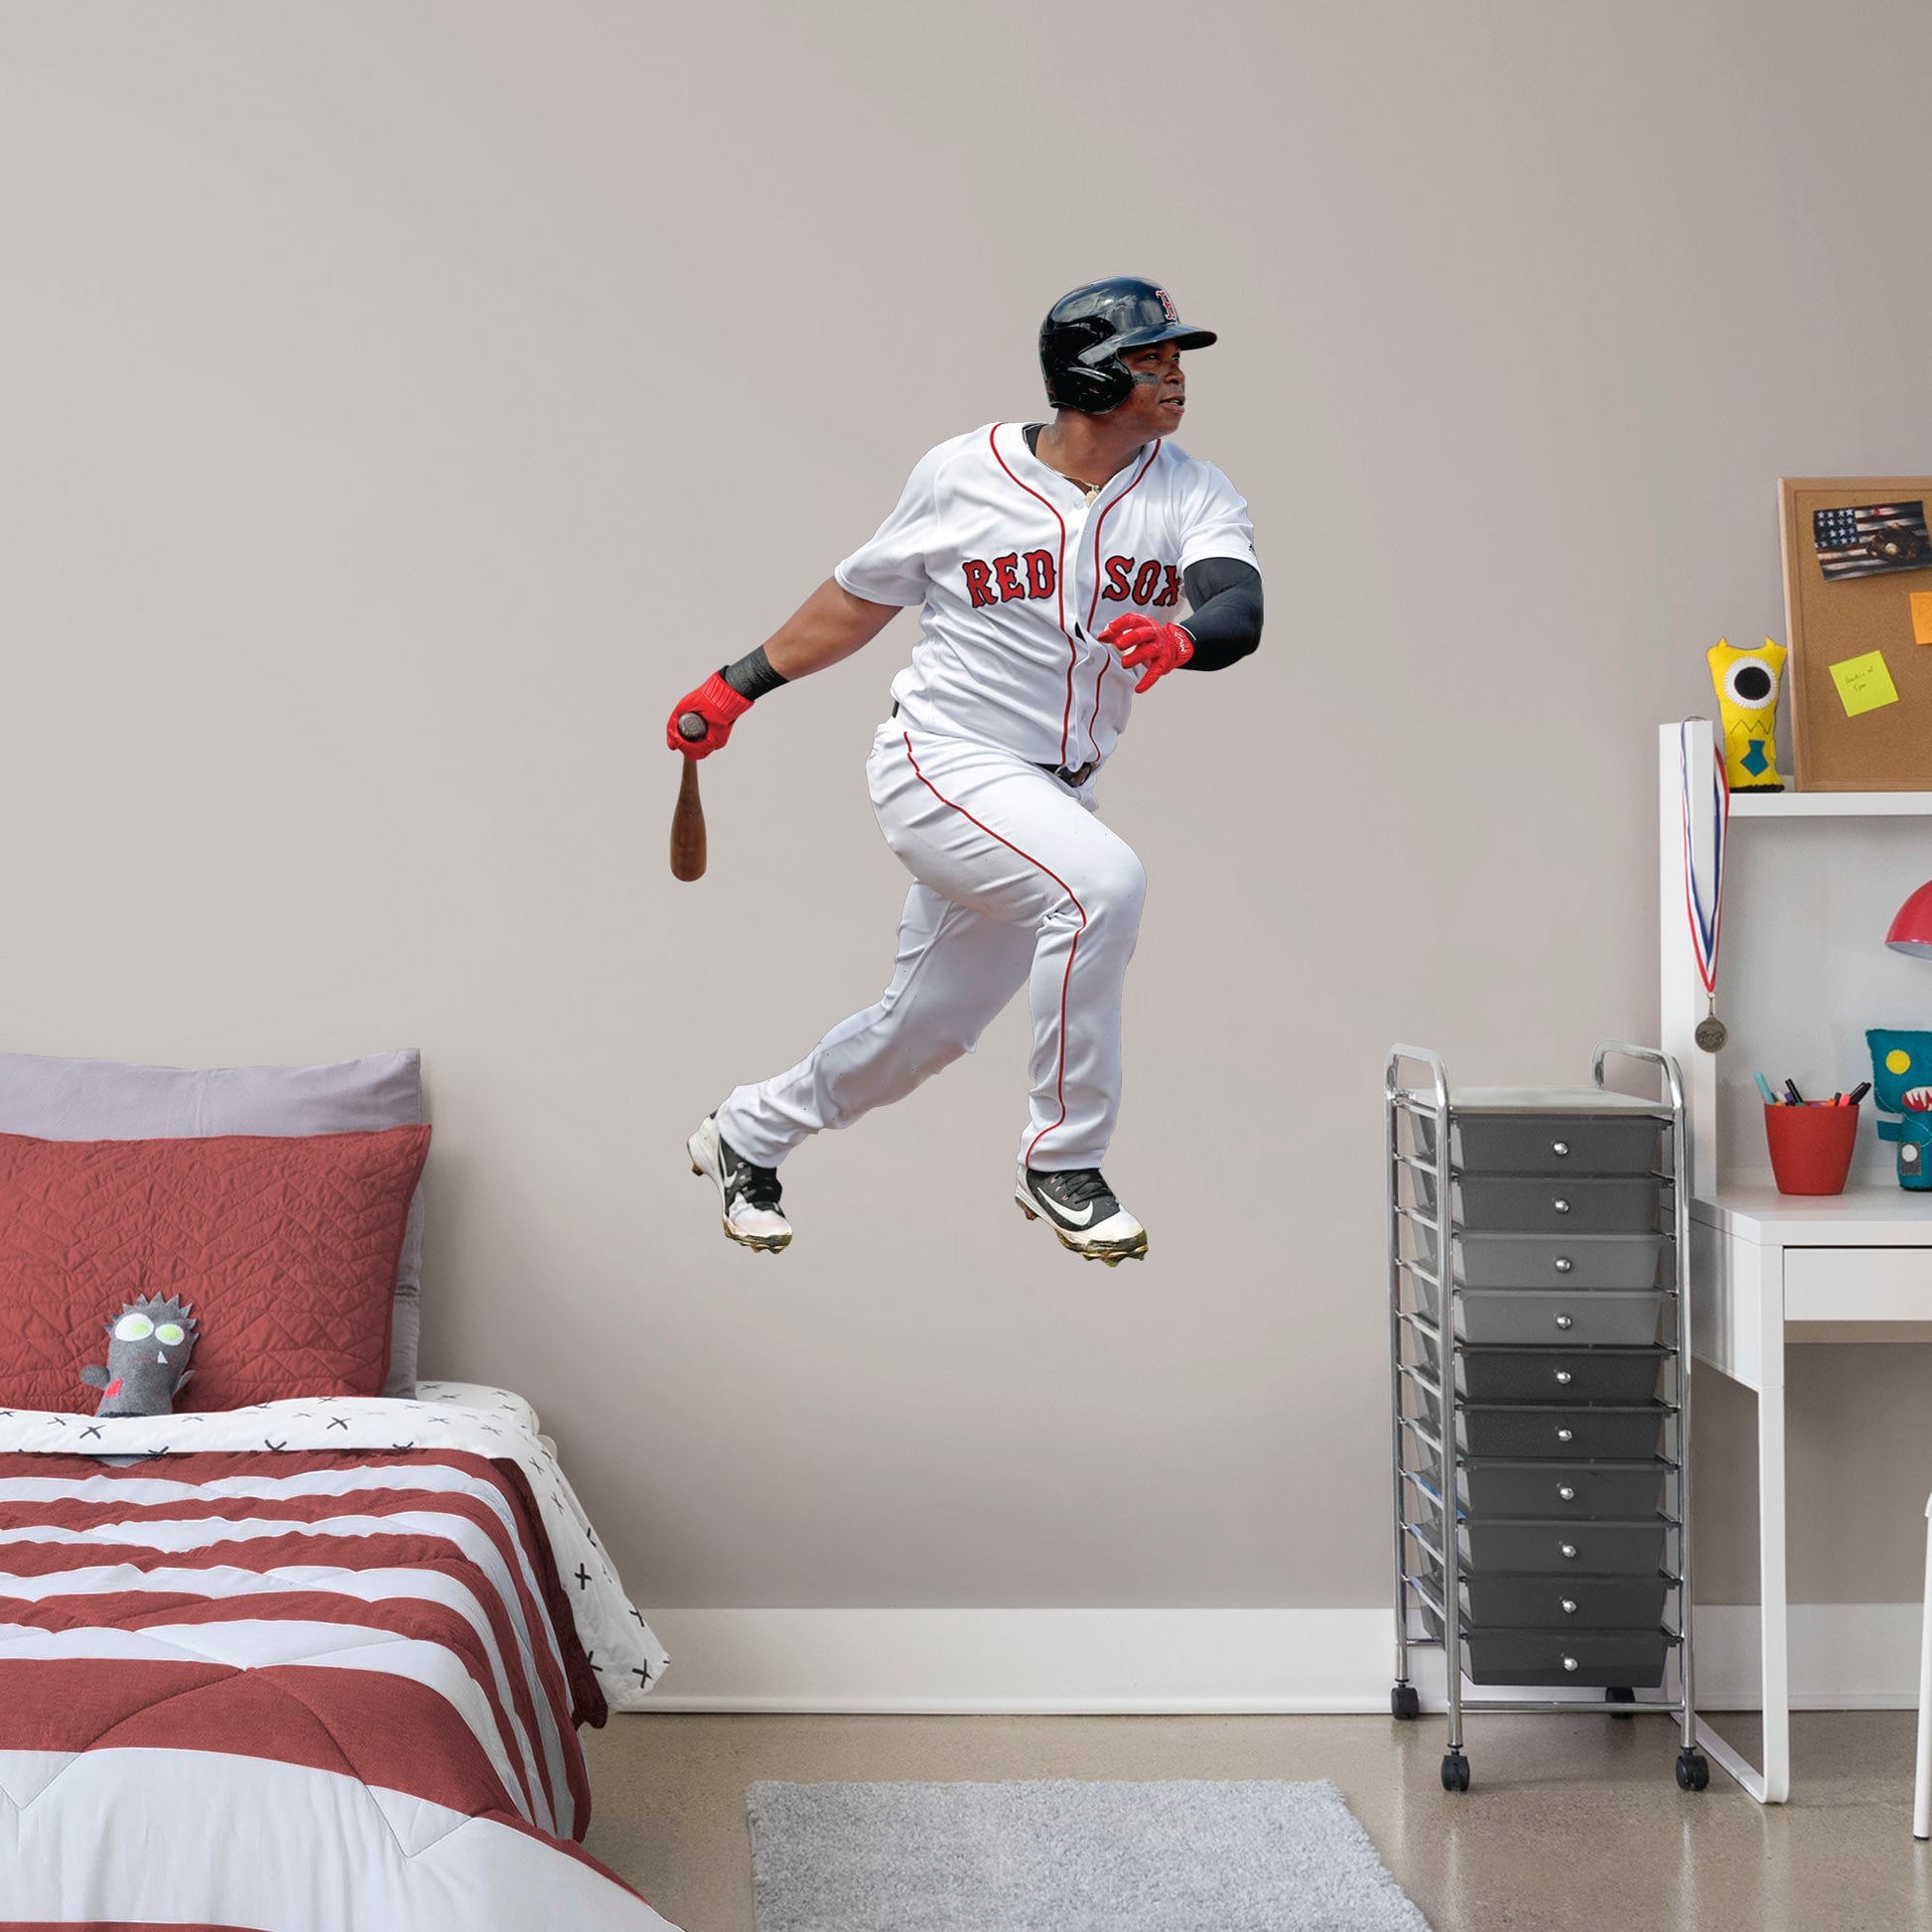 Boston Red Sox: Rafael Devers 2023 - Officially Licensed MLB Removable  Adhesive Decal